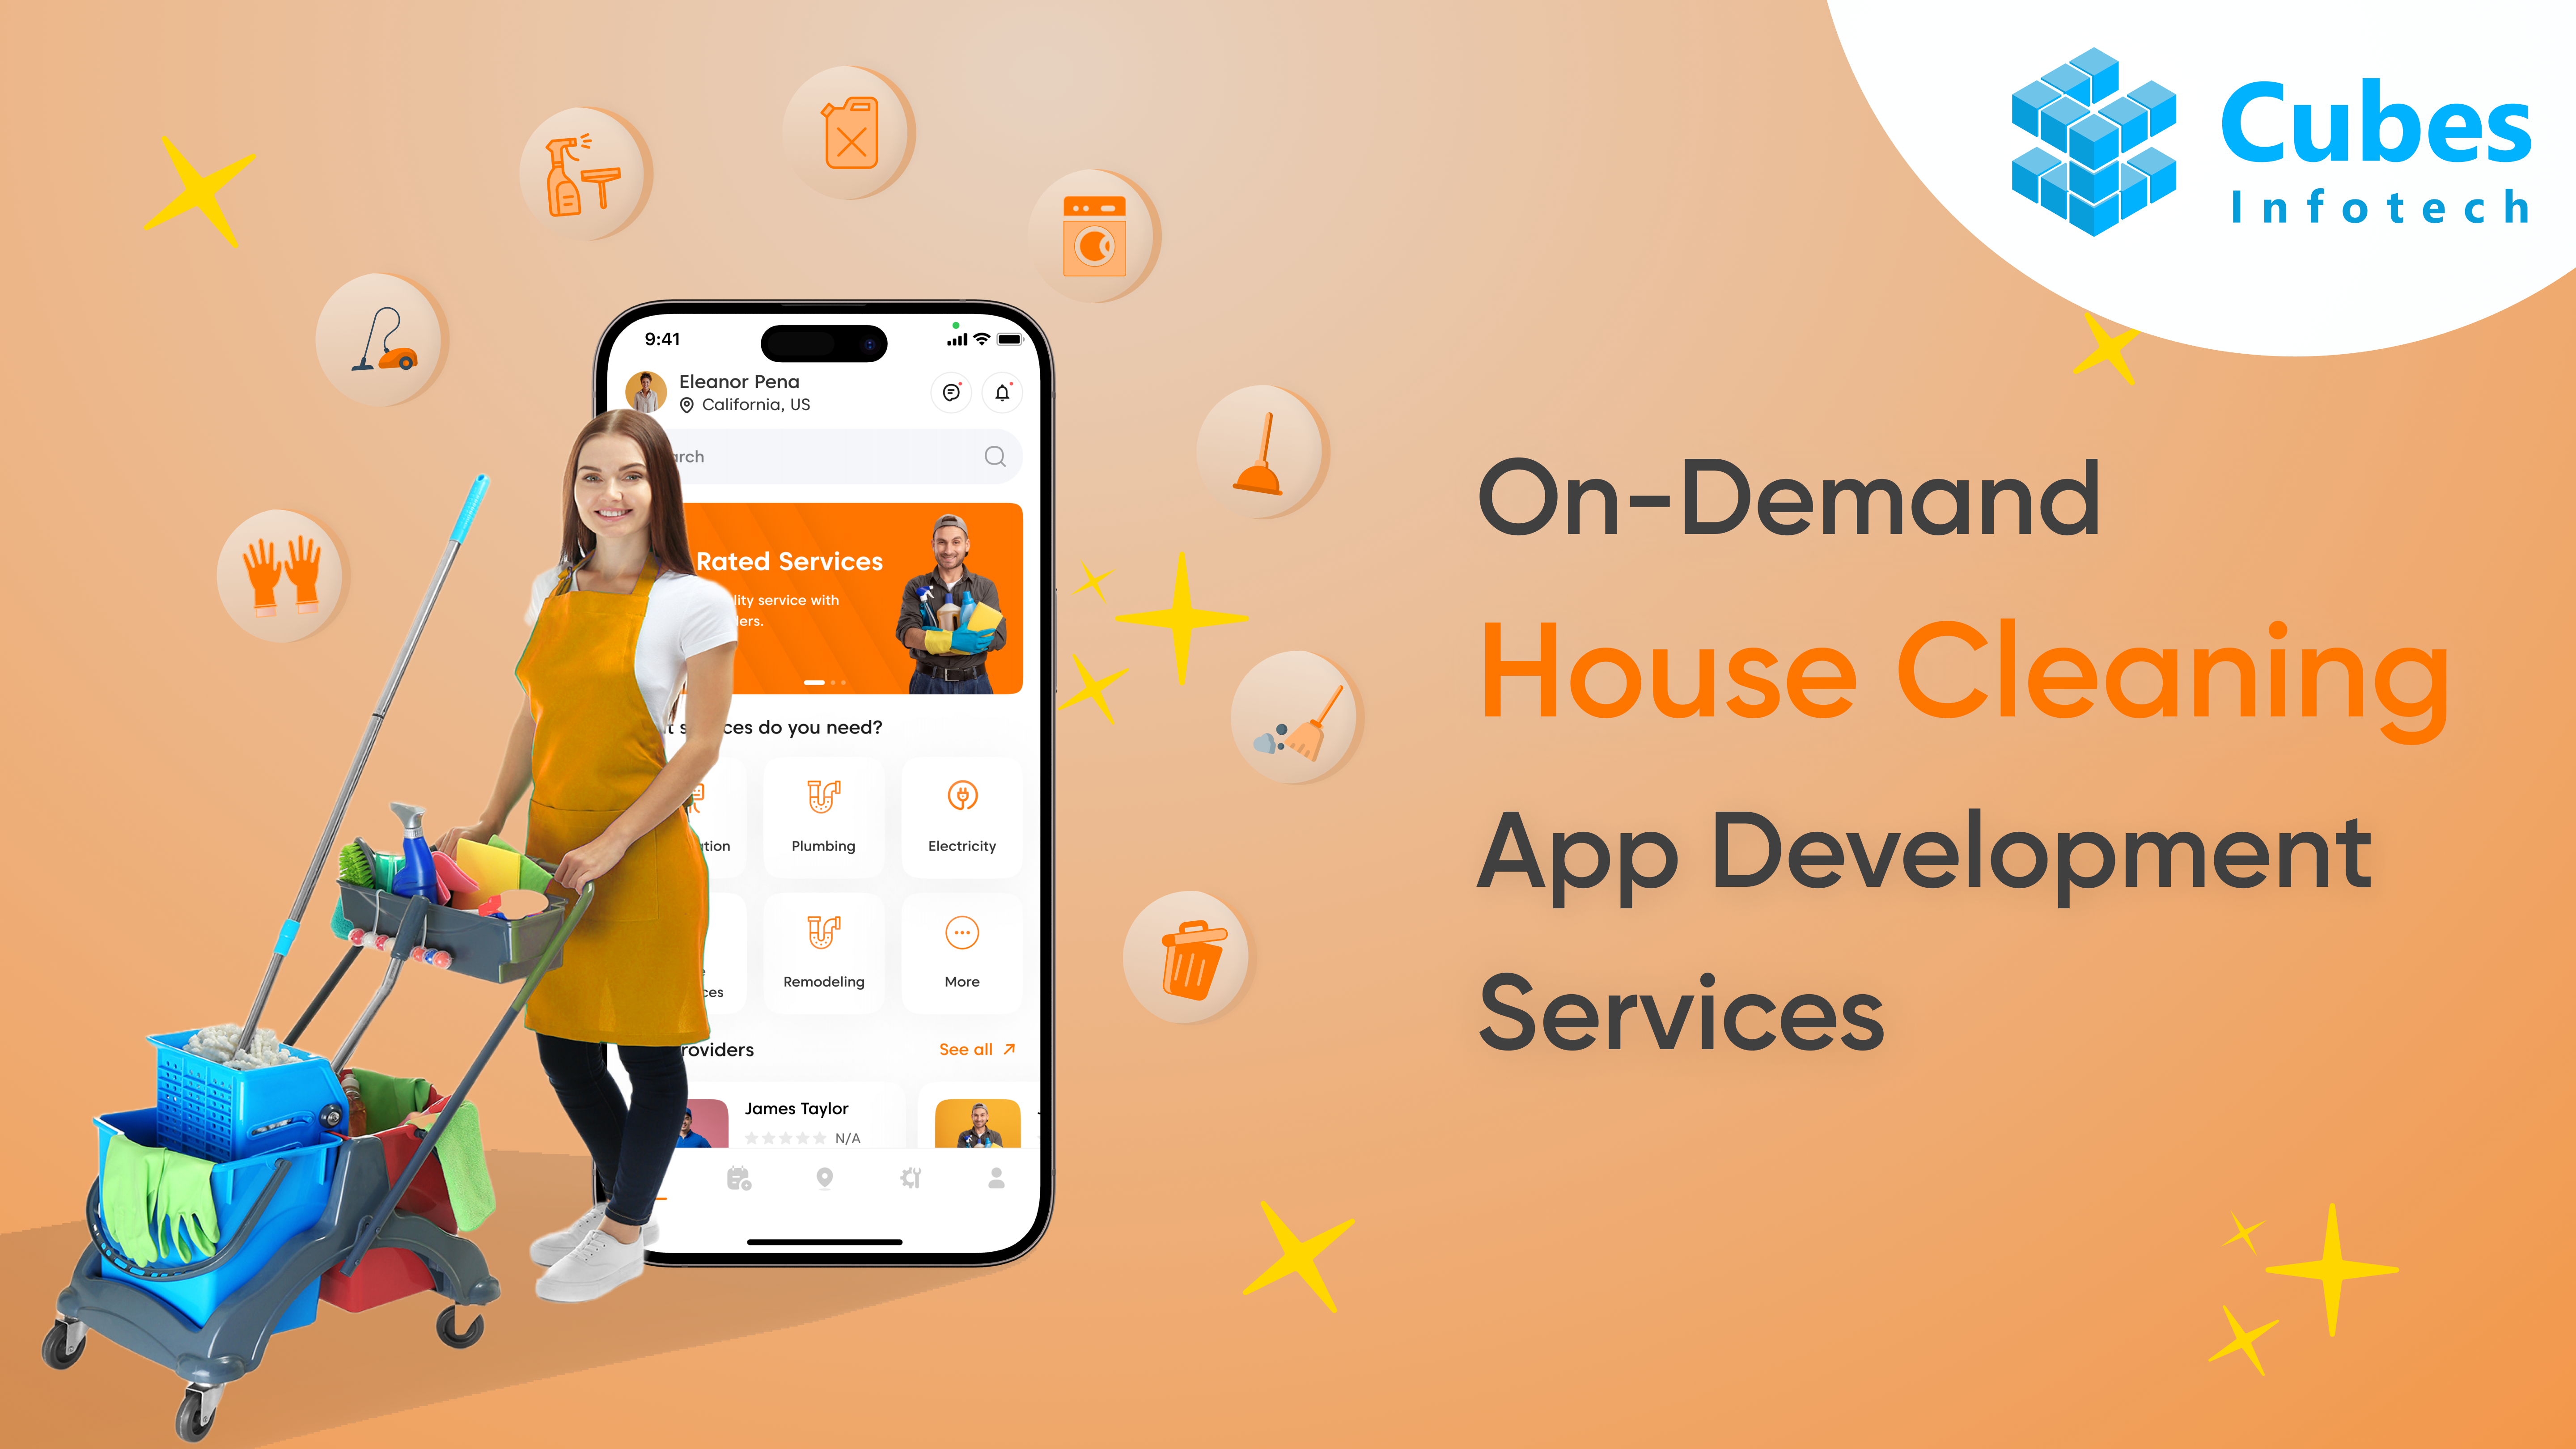 On Demand House Cleaning App Development Services